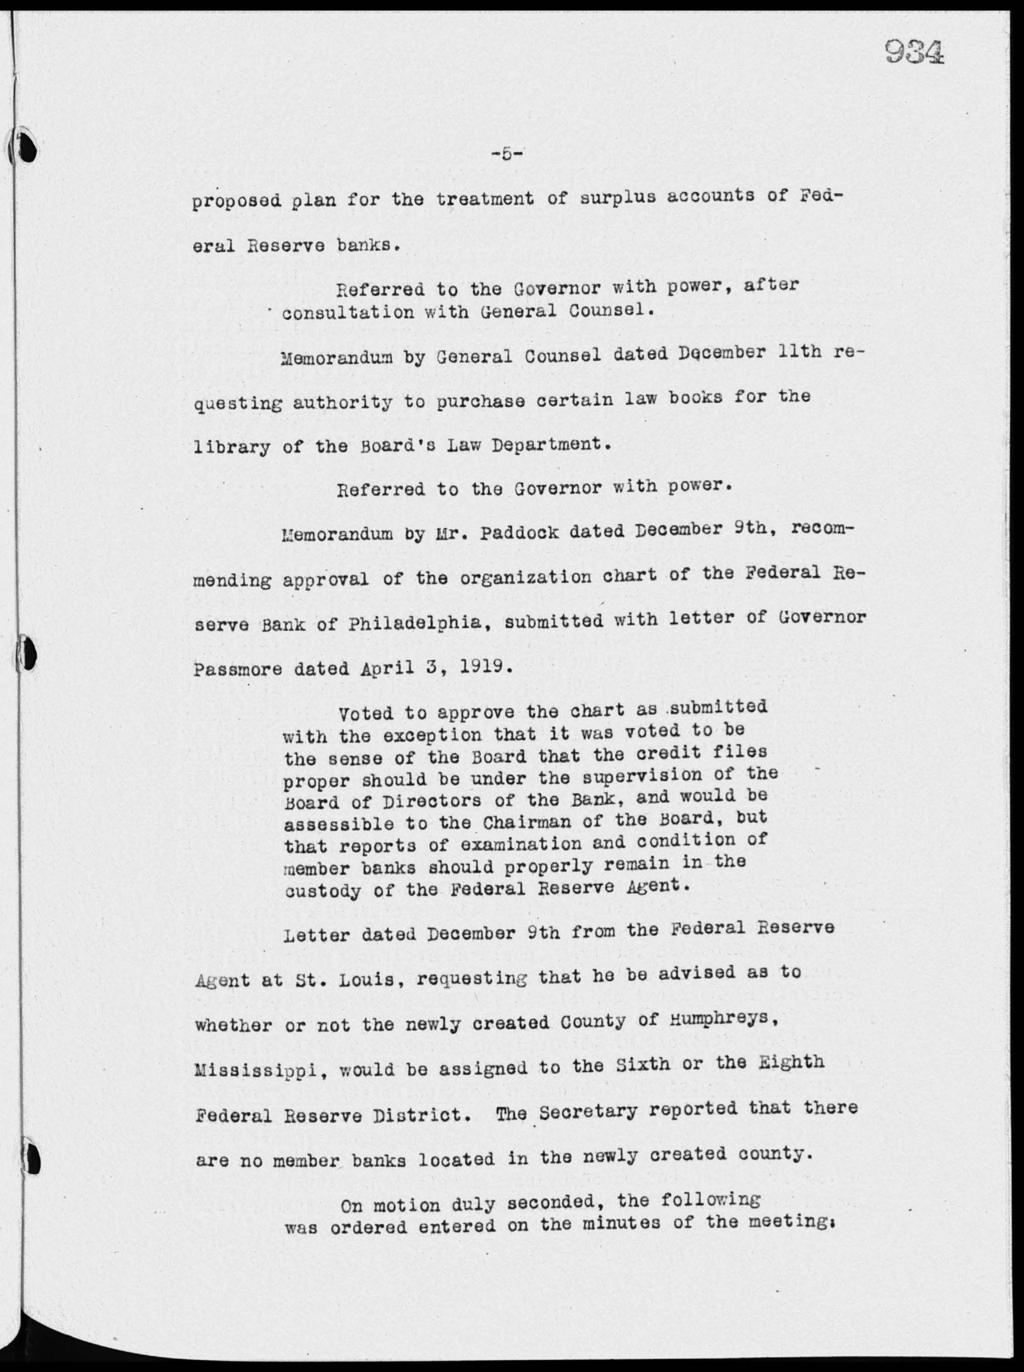 _ proposed plan for the treatment of surplus accounts of Federal Reserve banks. Referred to the Governor with power, after - consultation with General Counsel.